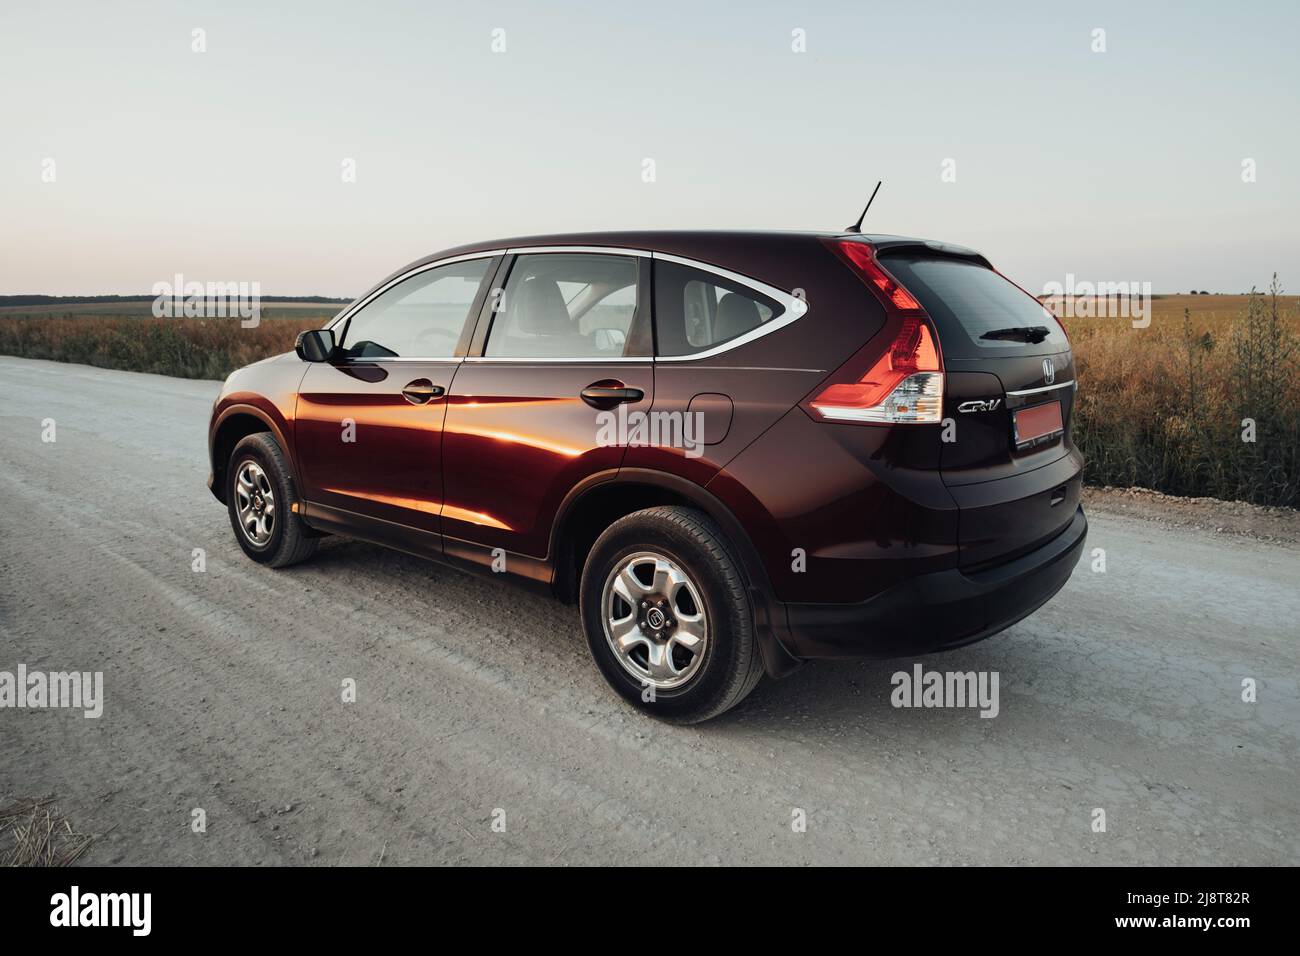 TERNOPIL, Ukraine - July 21 2021: Back View of Honda CR-V on the Country Road Stock Photo